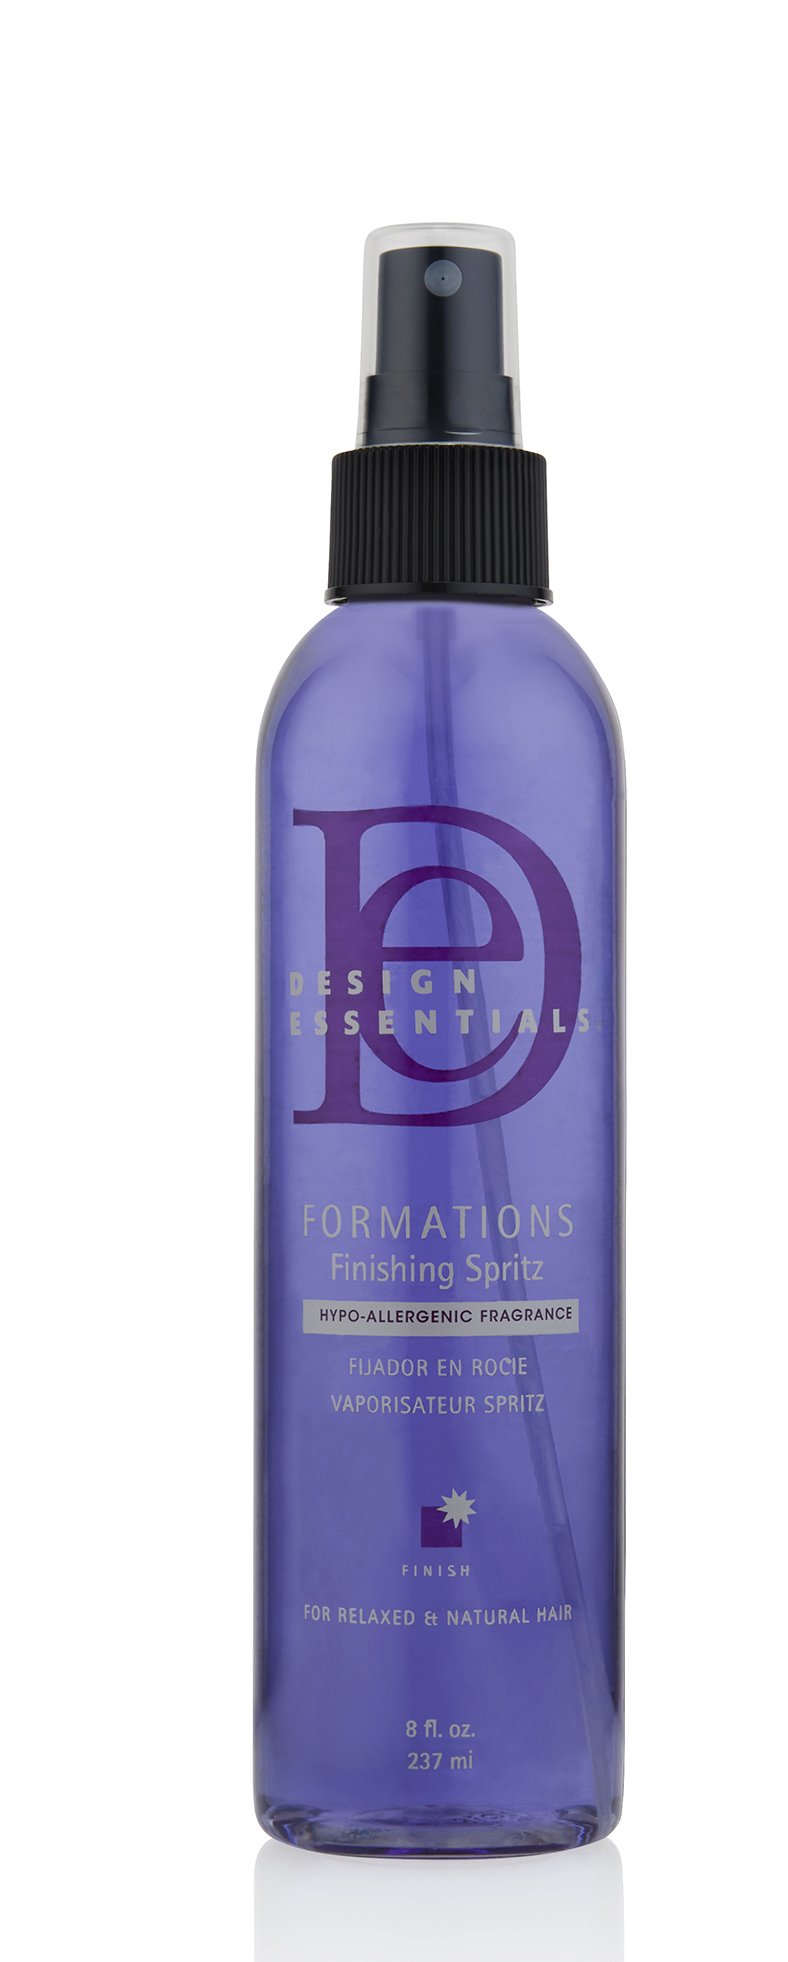 Design Essentials Formations Finishing Spritz with Hypo- Allergenic Fragrance